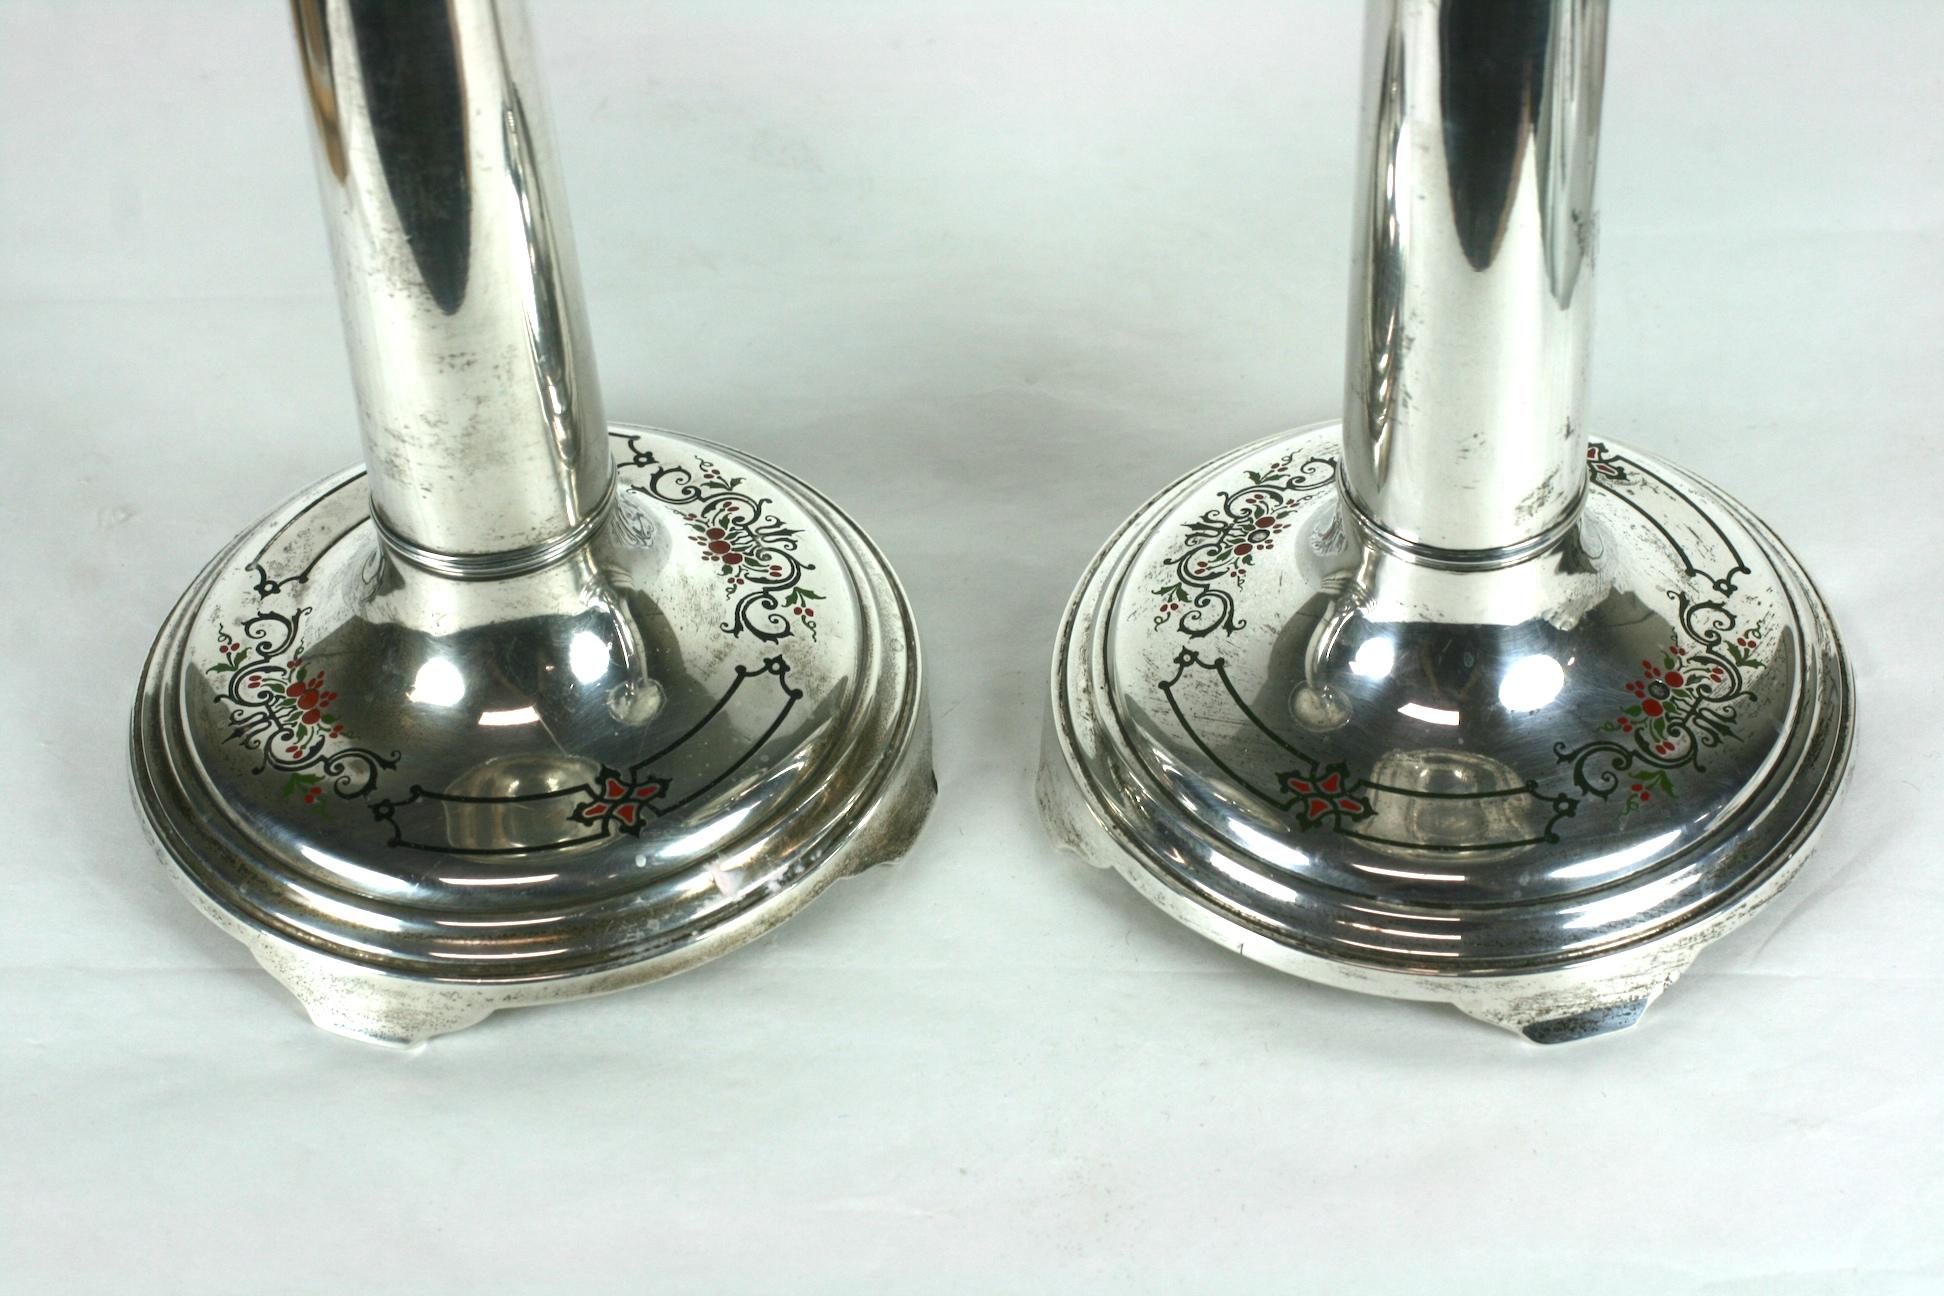 Unusual pair of elegant International sterling candlesticks which have cement filled shafts for stability. The bases are enameled with red and evergreen enamel designs with garlands and basket motifs.
Lovely quality heavy gauge construction with